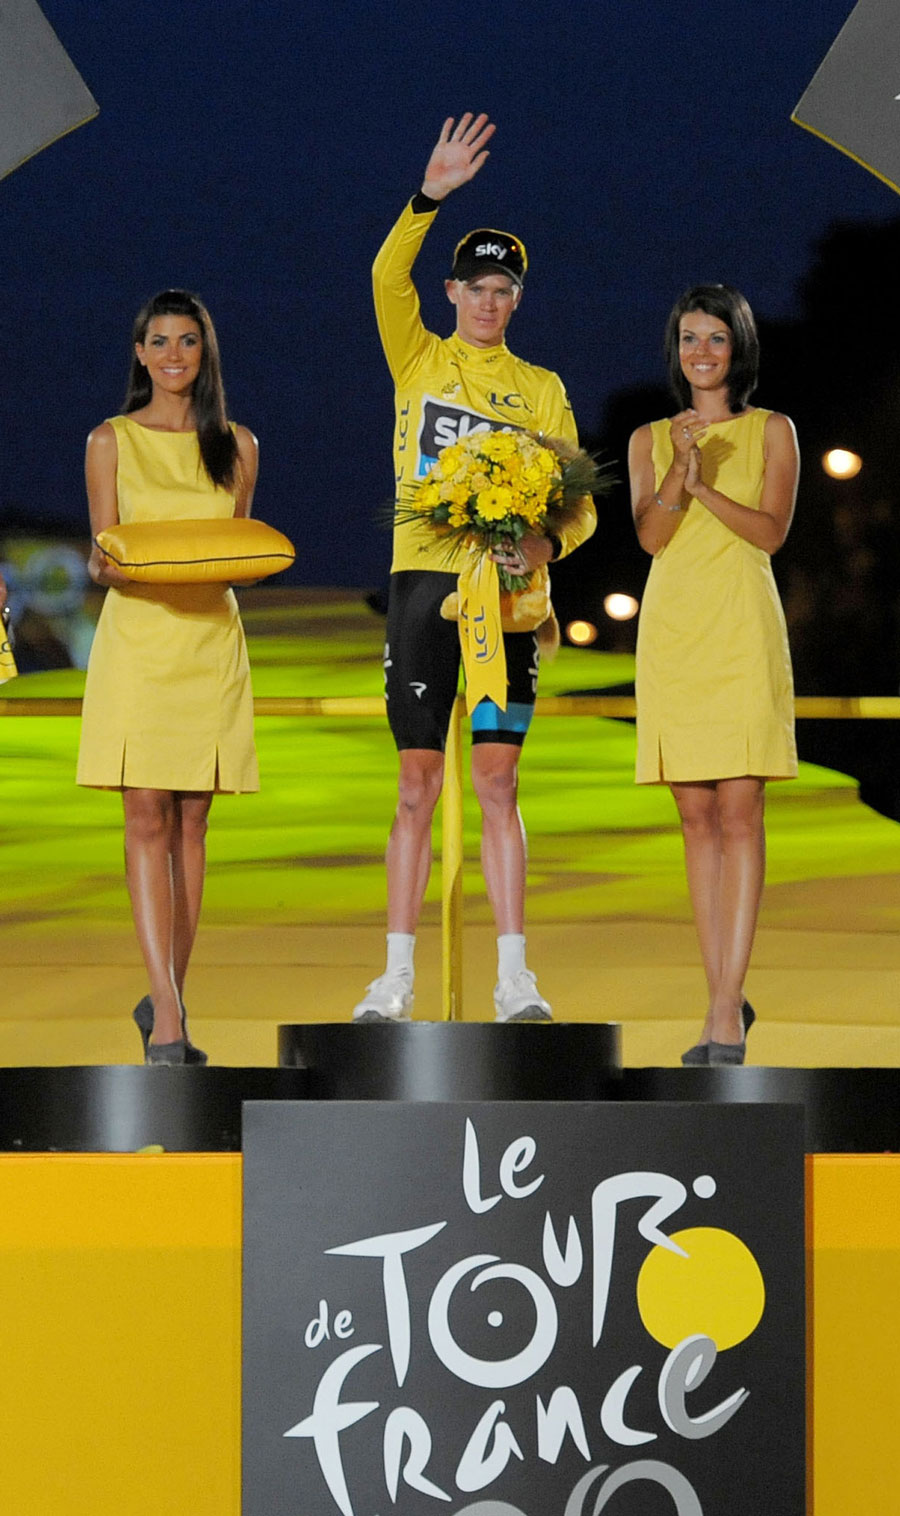 Chris Froome waves on the podium